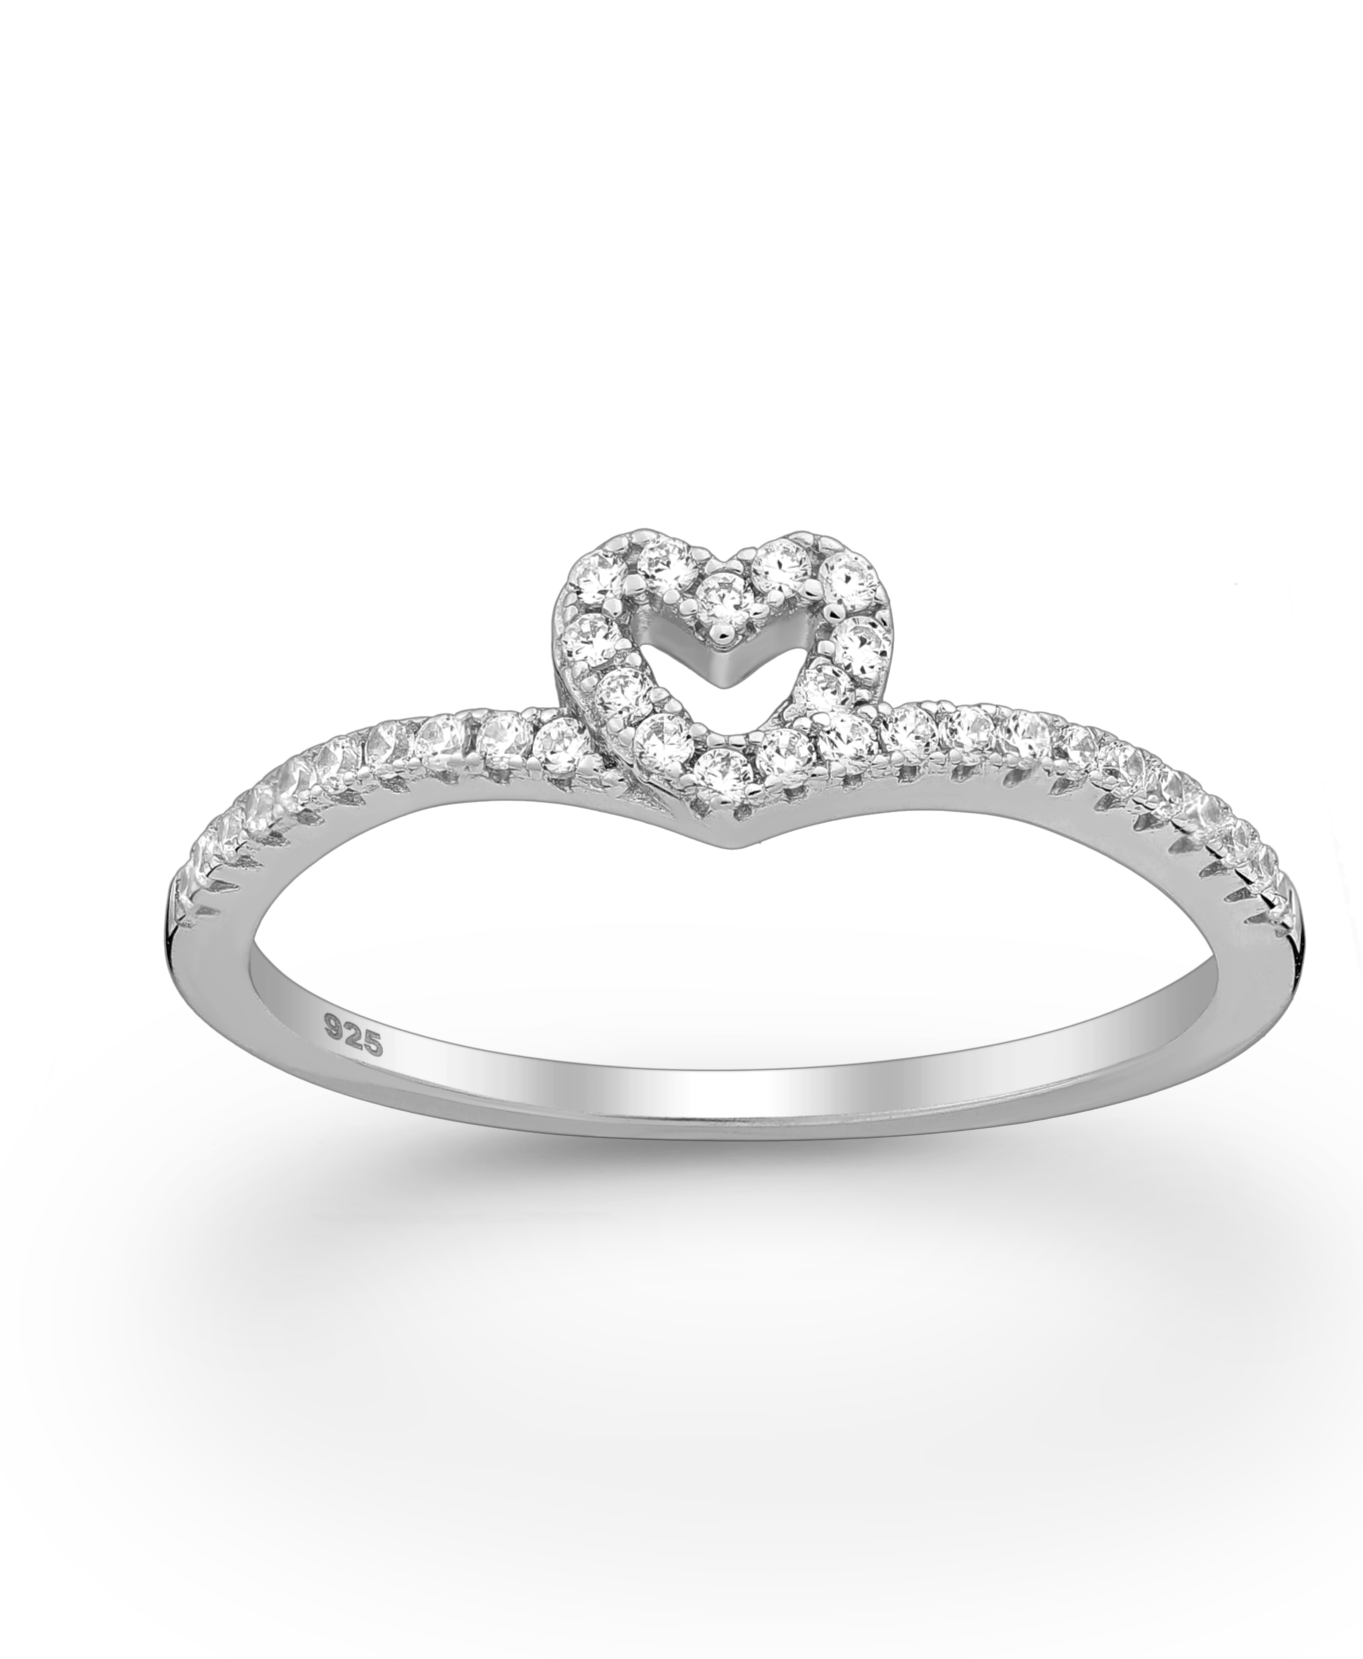 Sterling Silver Heart Ring with CZ Simulated Diamonds